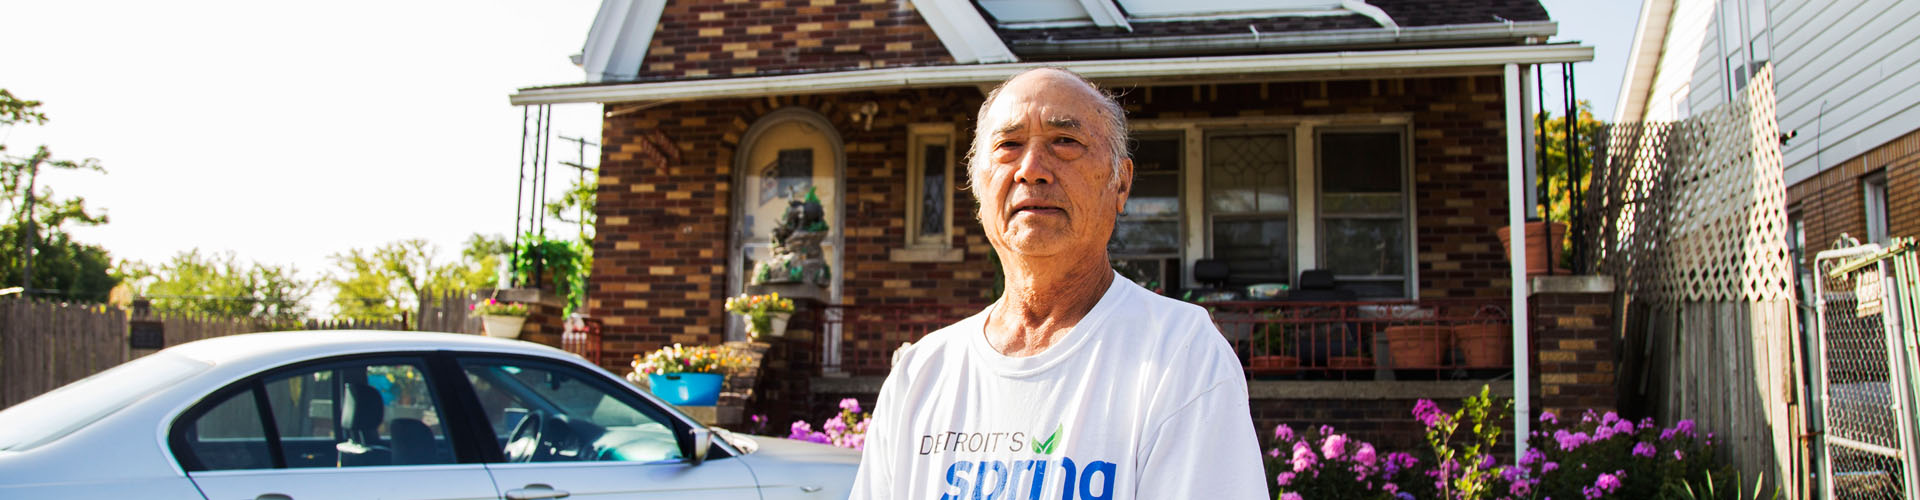 Naoying Yang stands in front of his house in Detroit